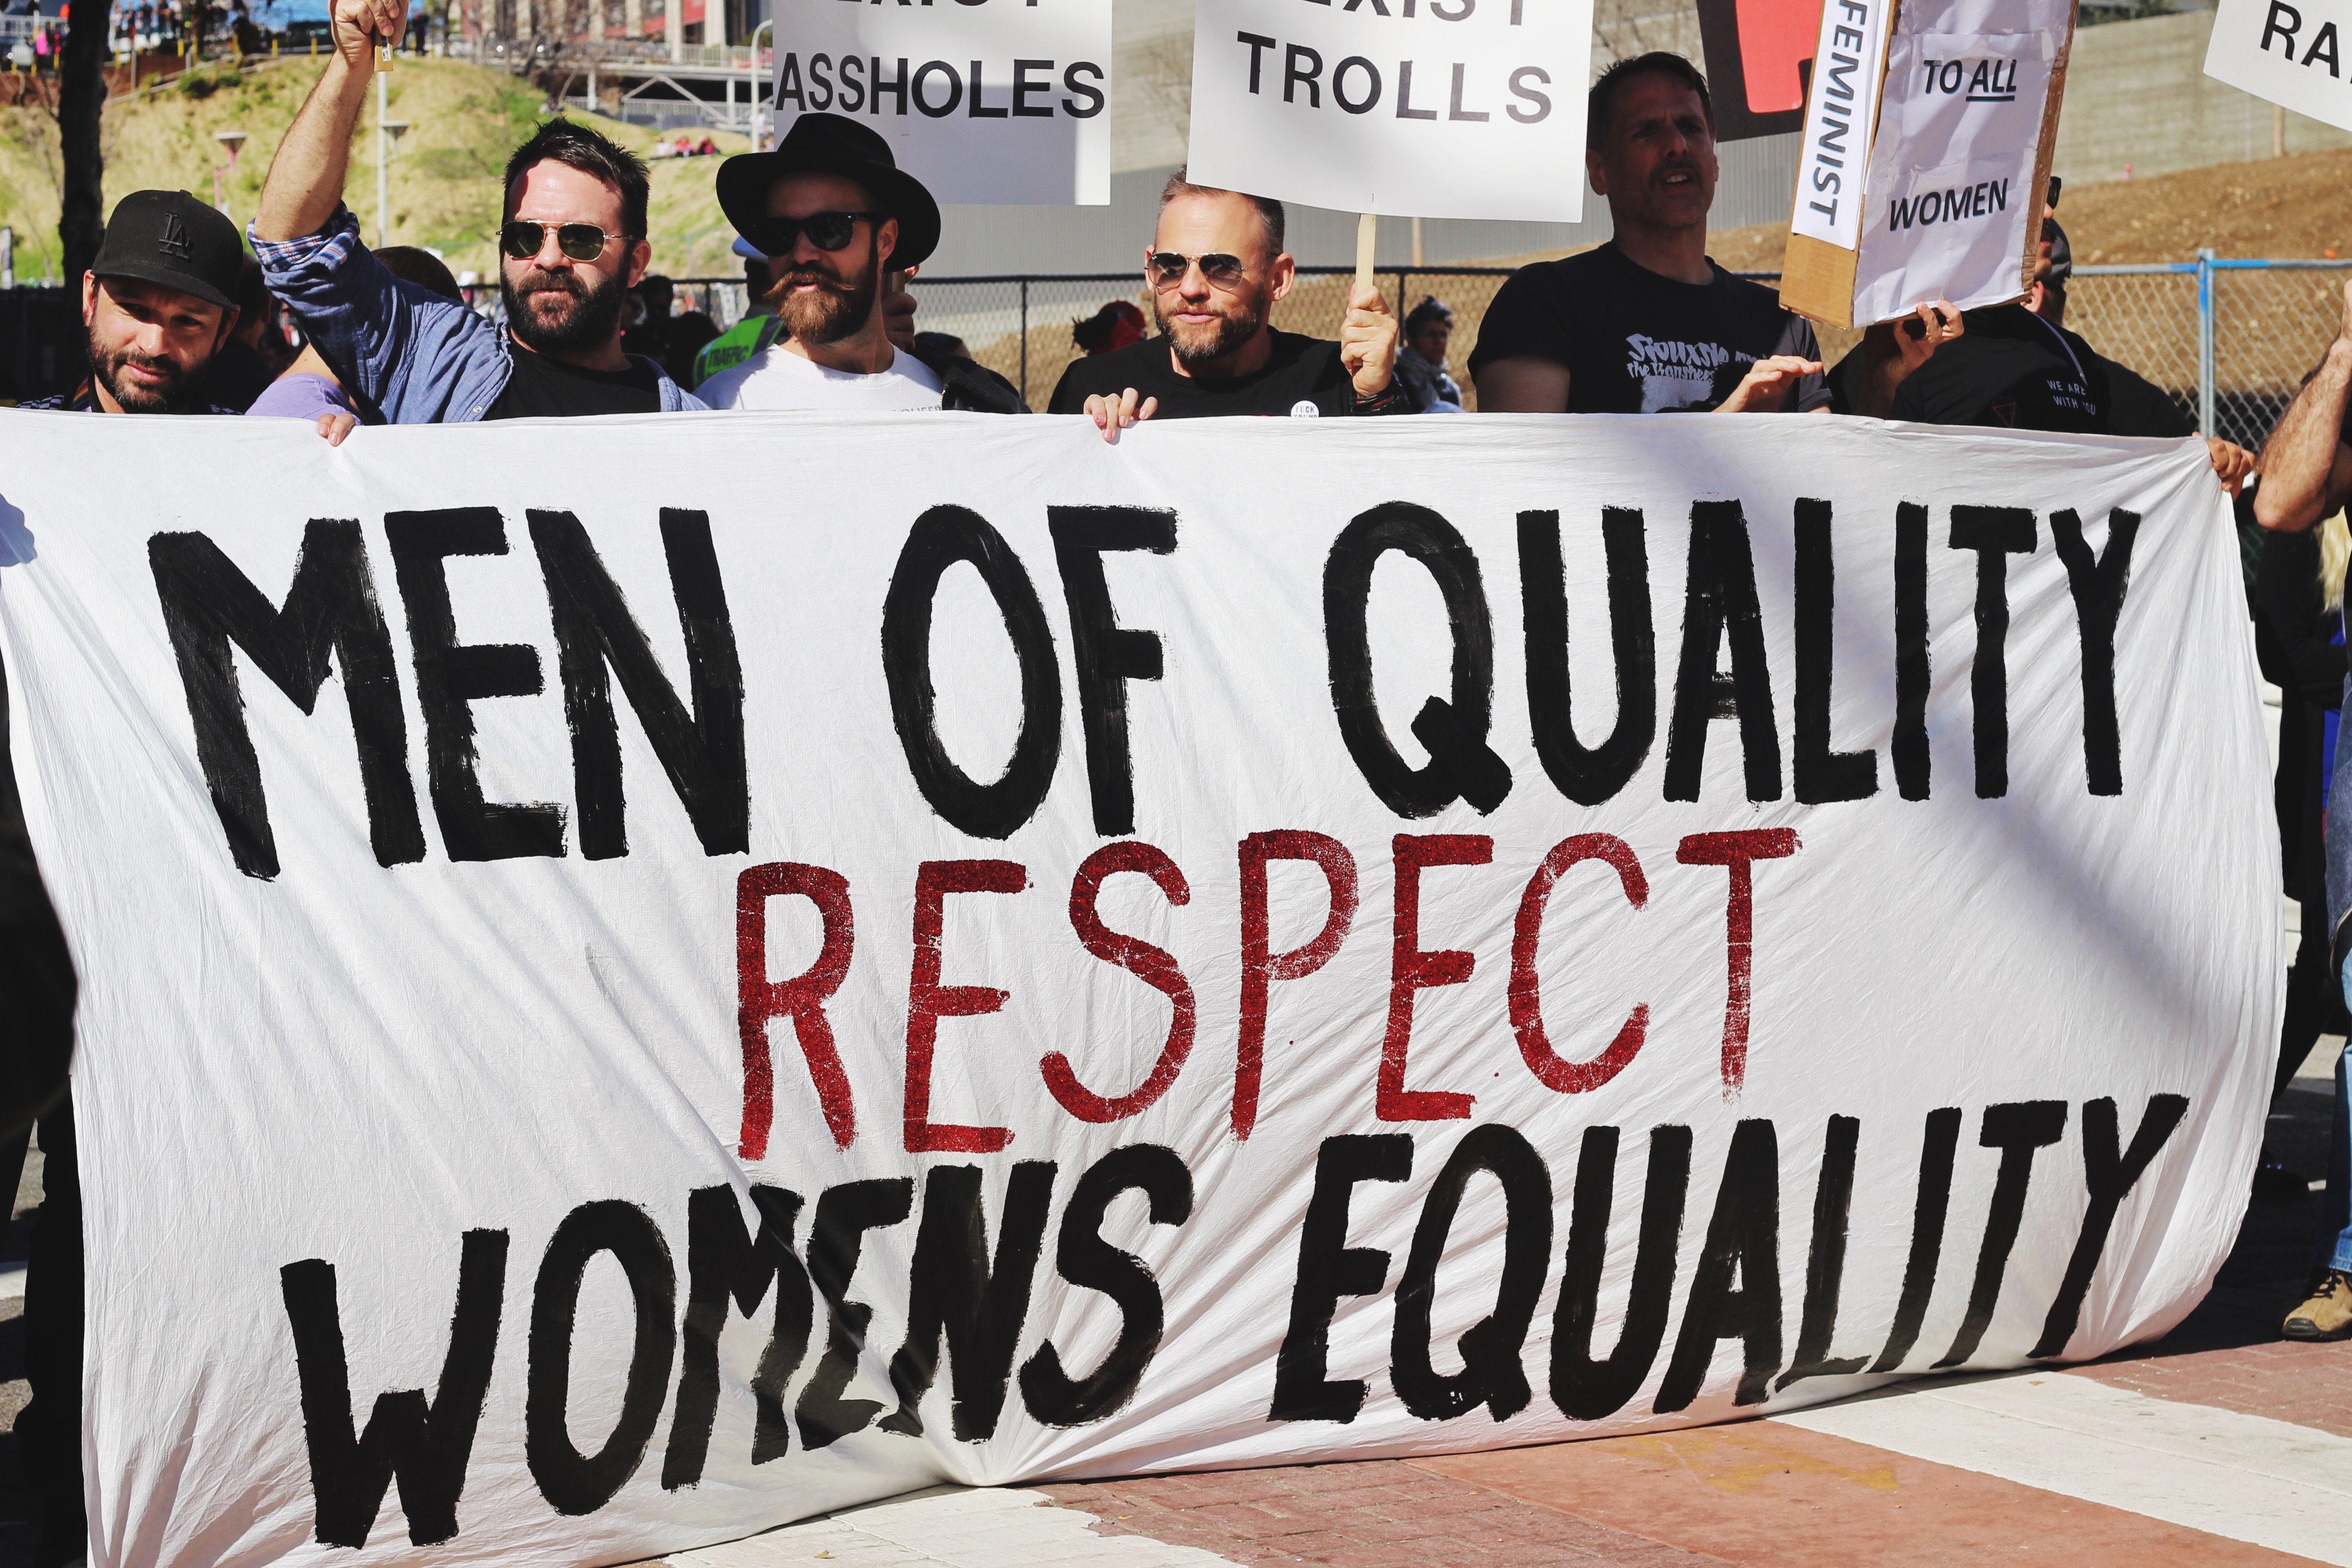 people rallying for men of quality respect womens equality